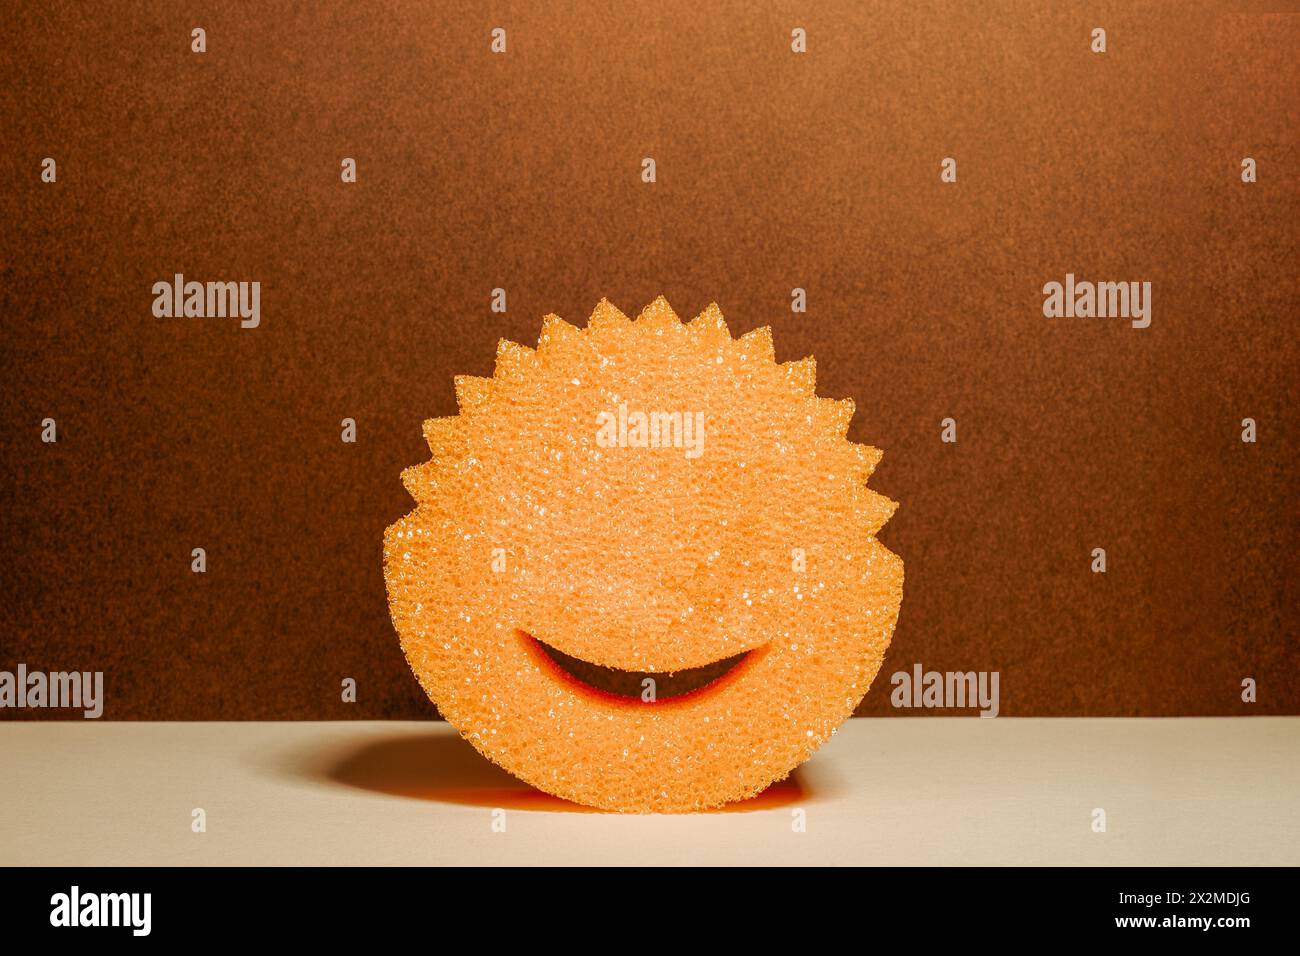 A vibrantly orange sponge with a cut-out smile sits against a brown backdrop, offering a simple yet cheerful visual metaphor for cleanliness and happi Stock Photo